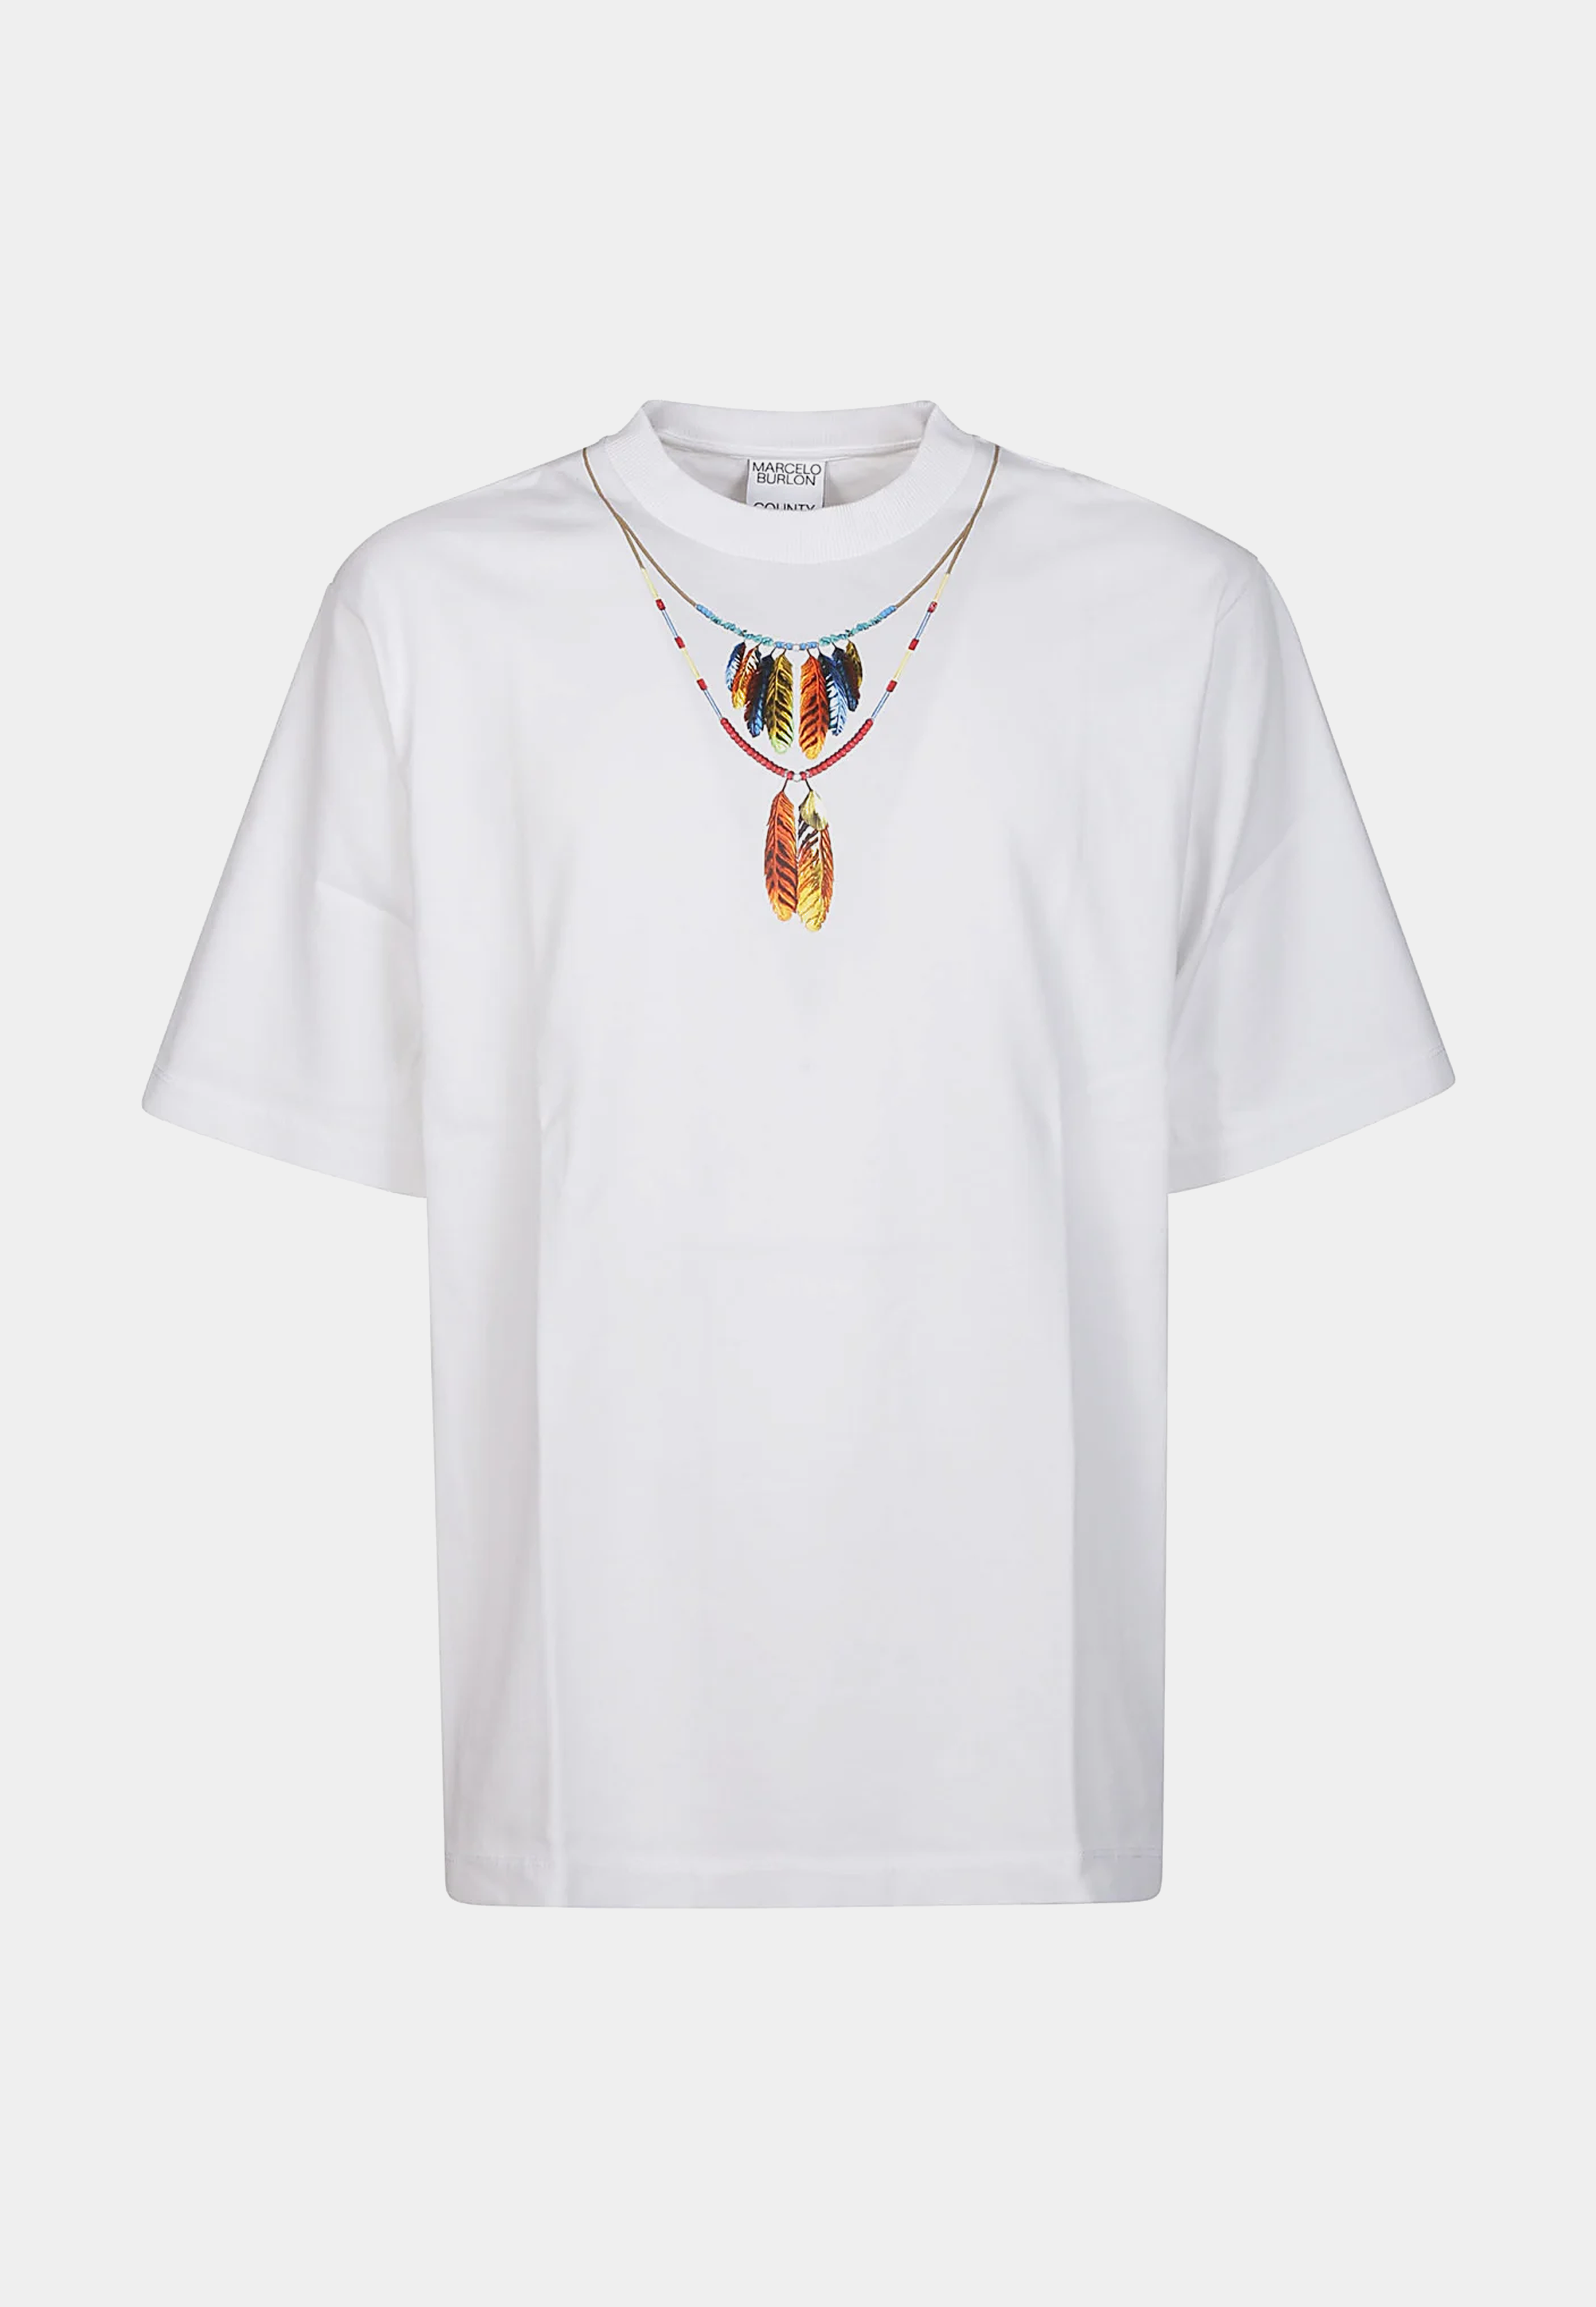 MARCELO BURLON Feathers Necklace Over Tee - White Red